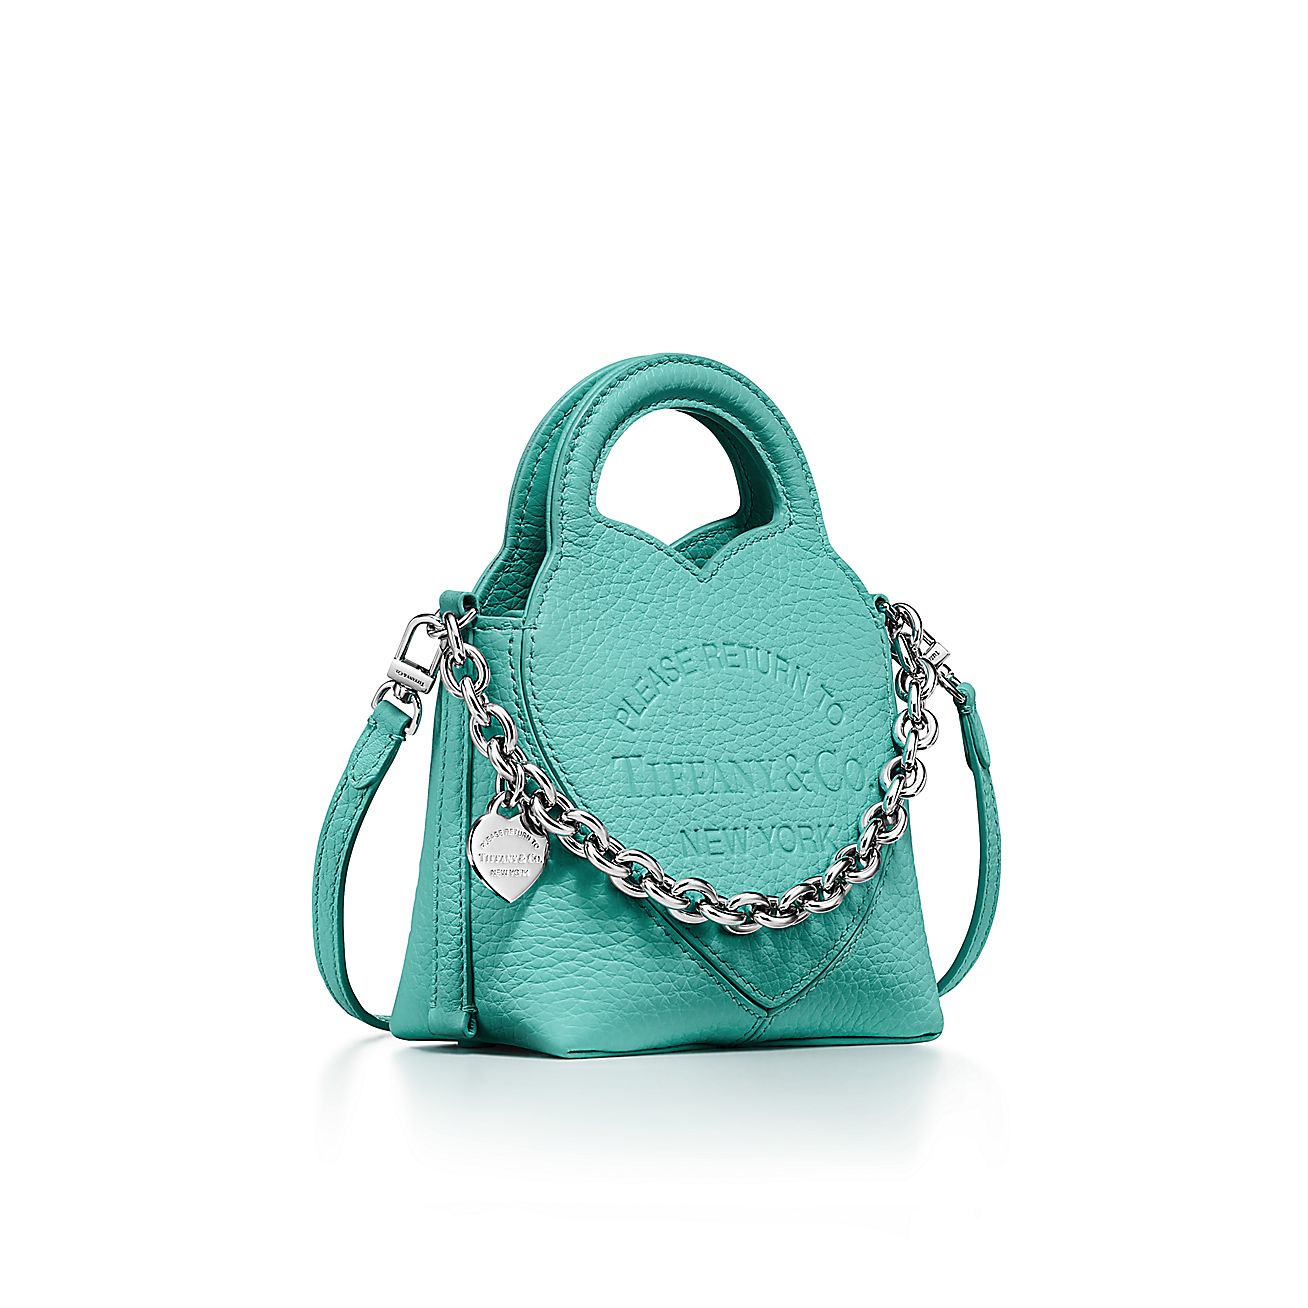 Our brand new 1837 Blue Return to Tiffany Bag in taurillon leather